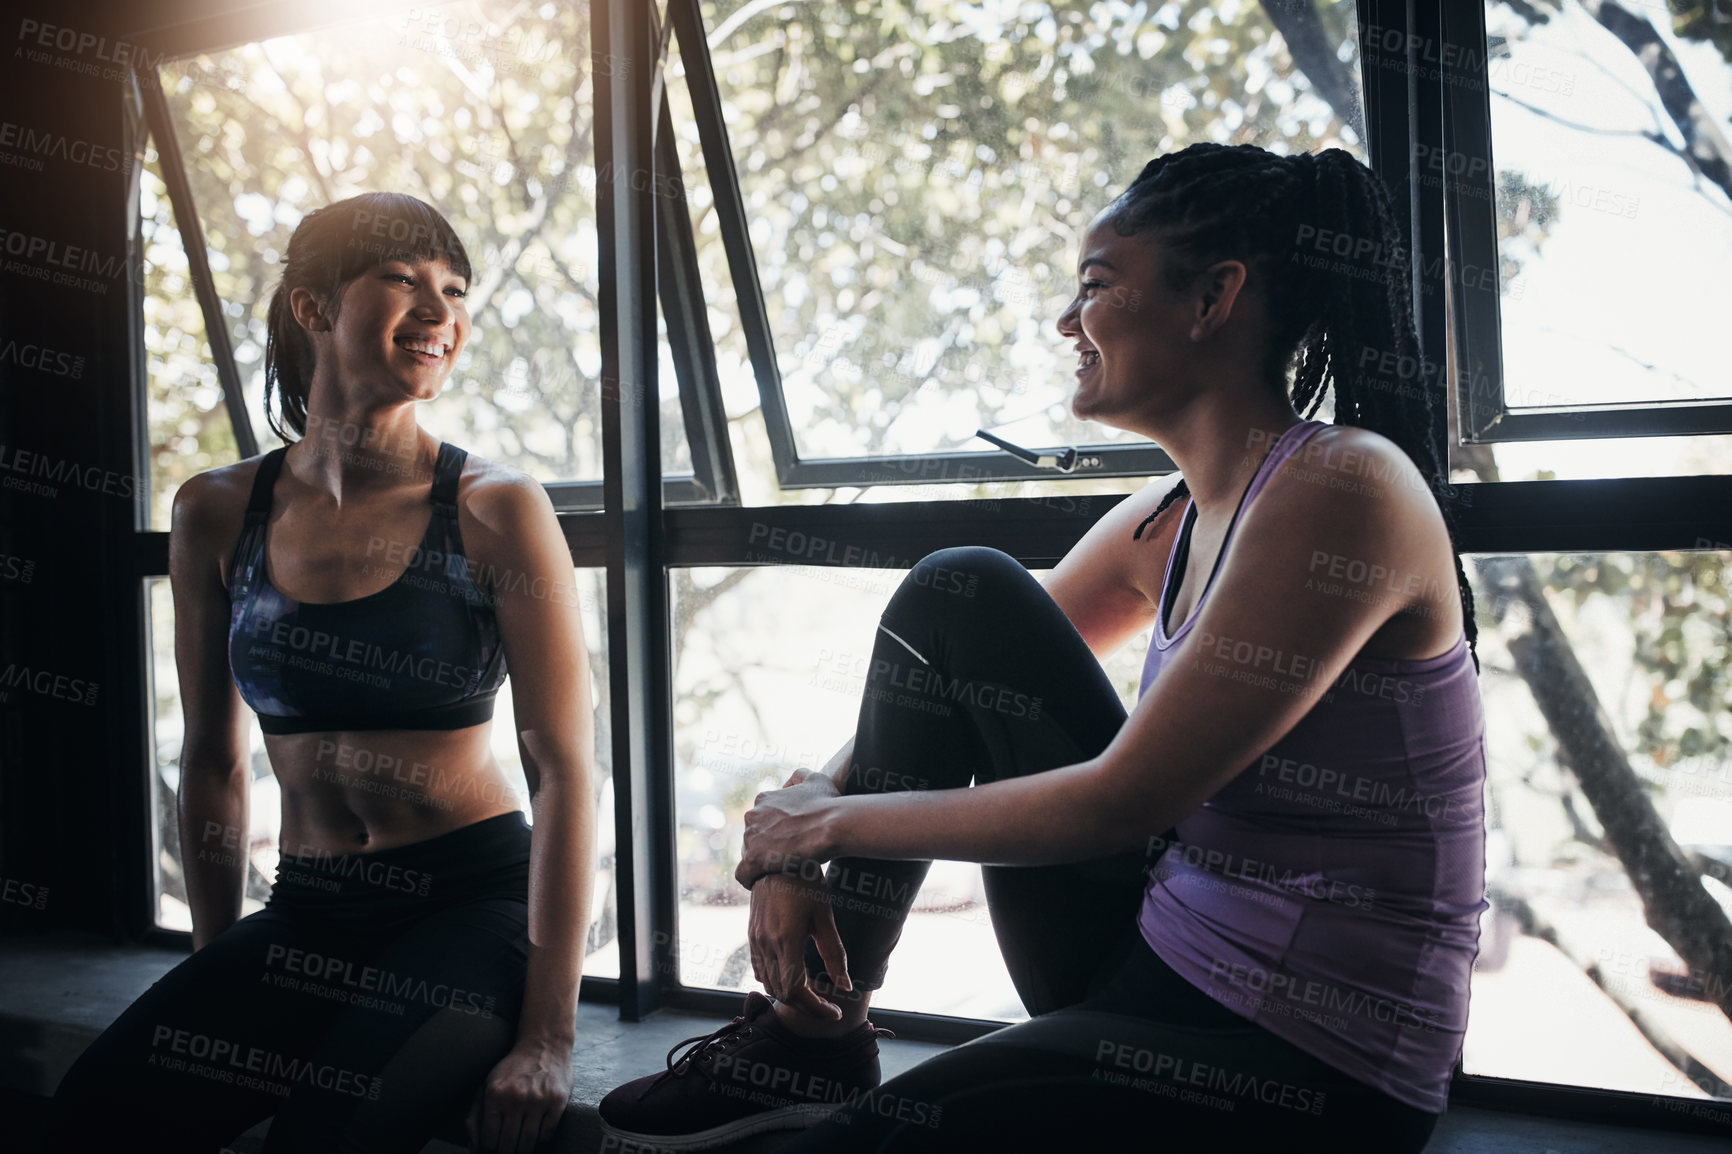 Buy stock photo Shot of two friends chatting while out for a workout at the gym